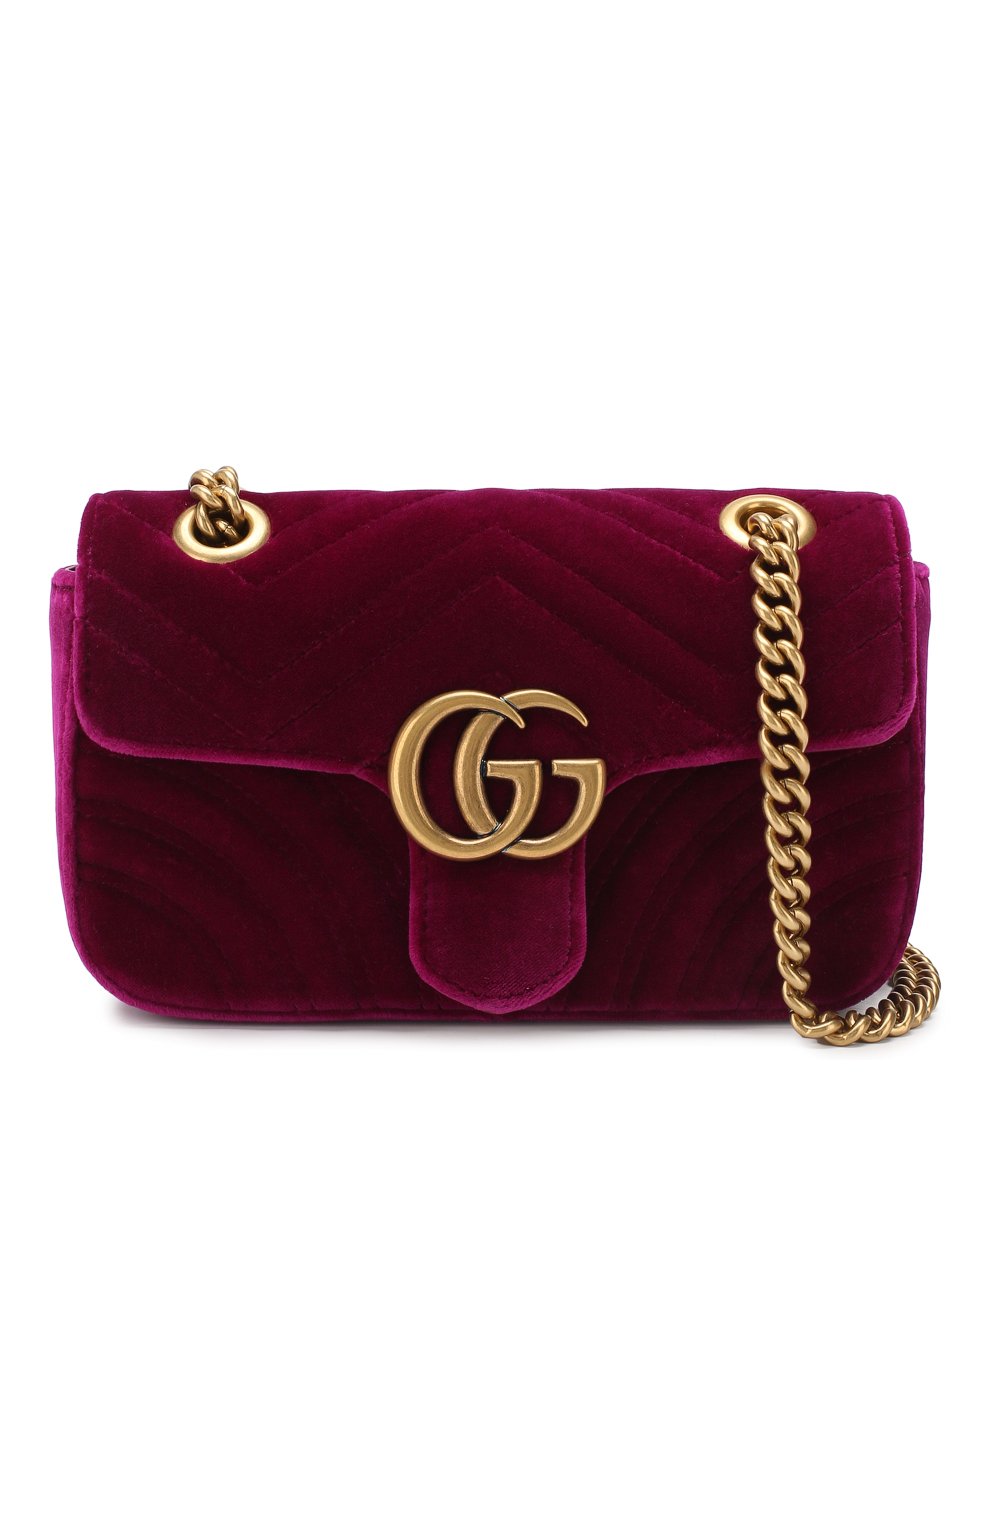 Gucci Marmont Suede Bag Review